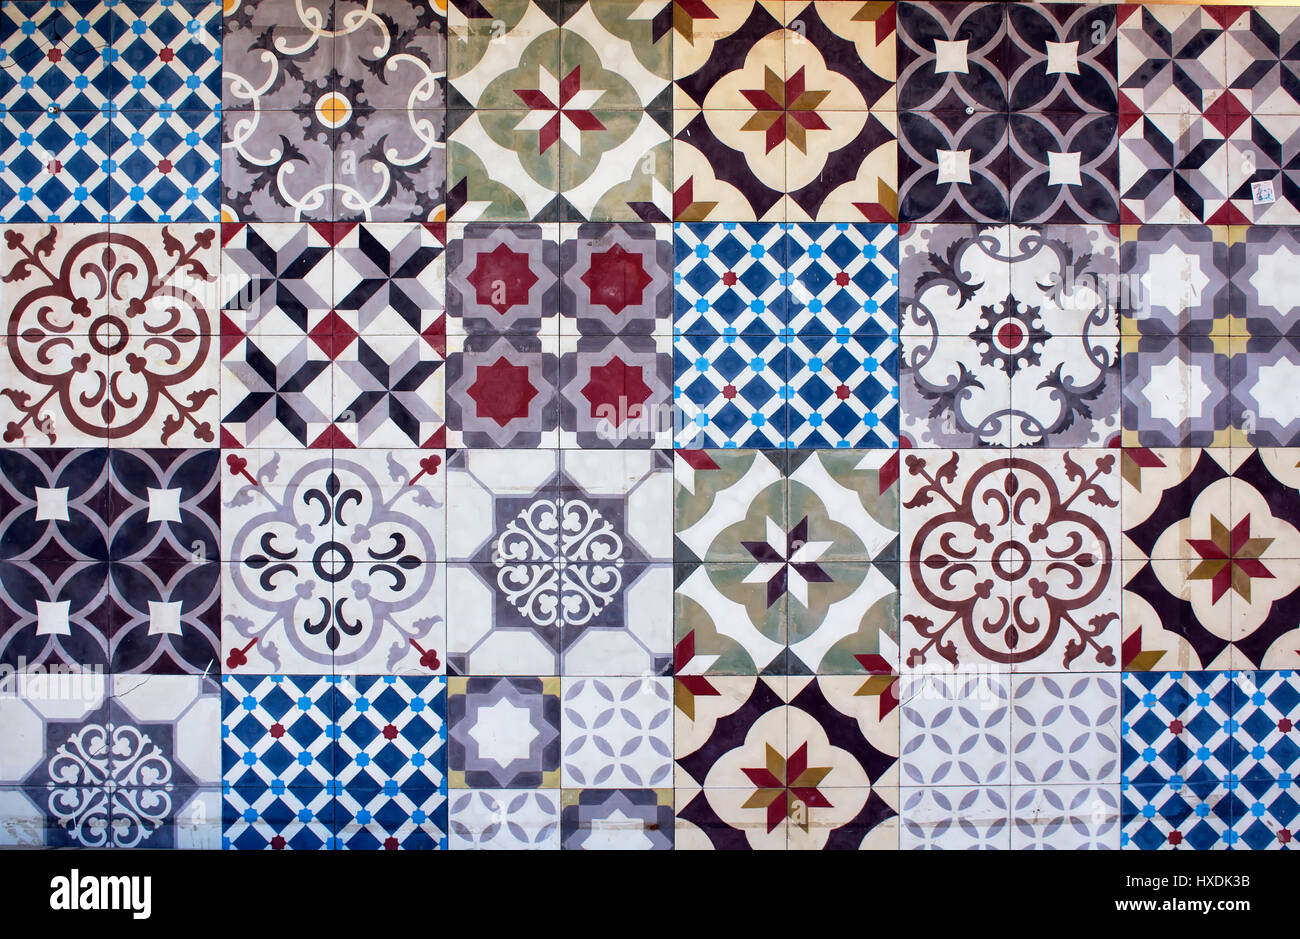 Different types of many Mediterranean / Aegean tiles. Captured in Bodrum peninsula / Turkey. True reflection of culture and lifestyle. Stock Photo